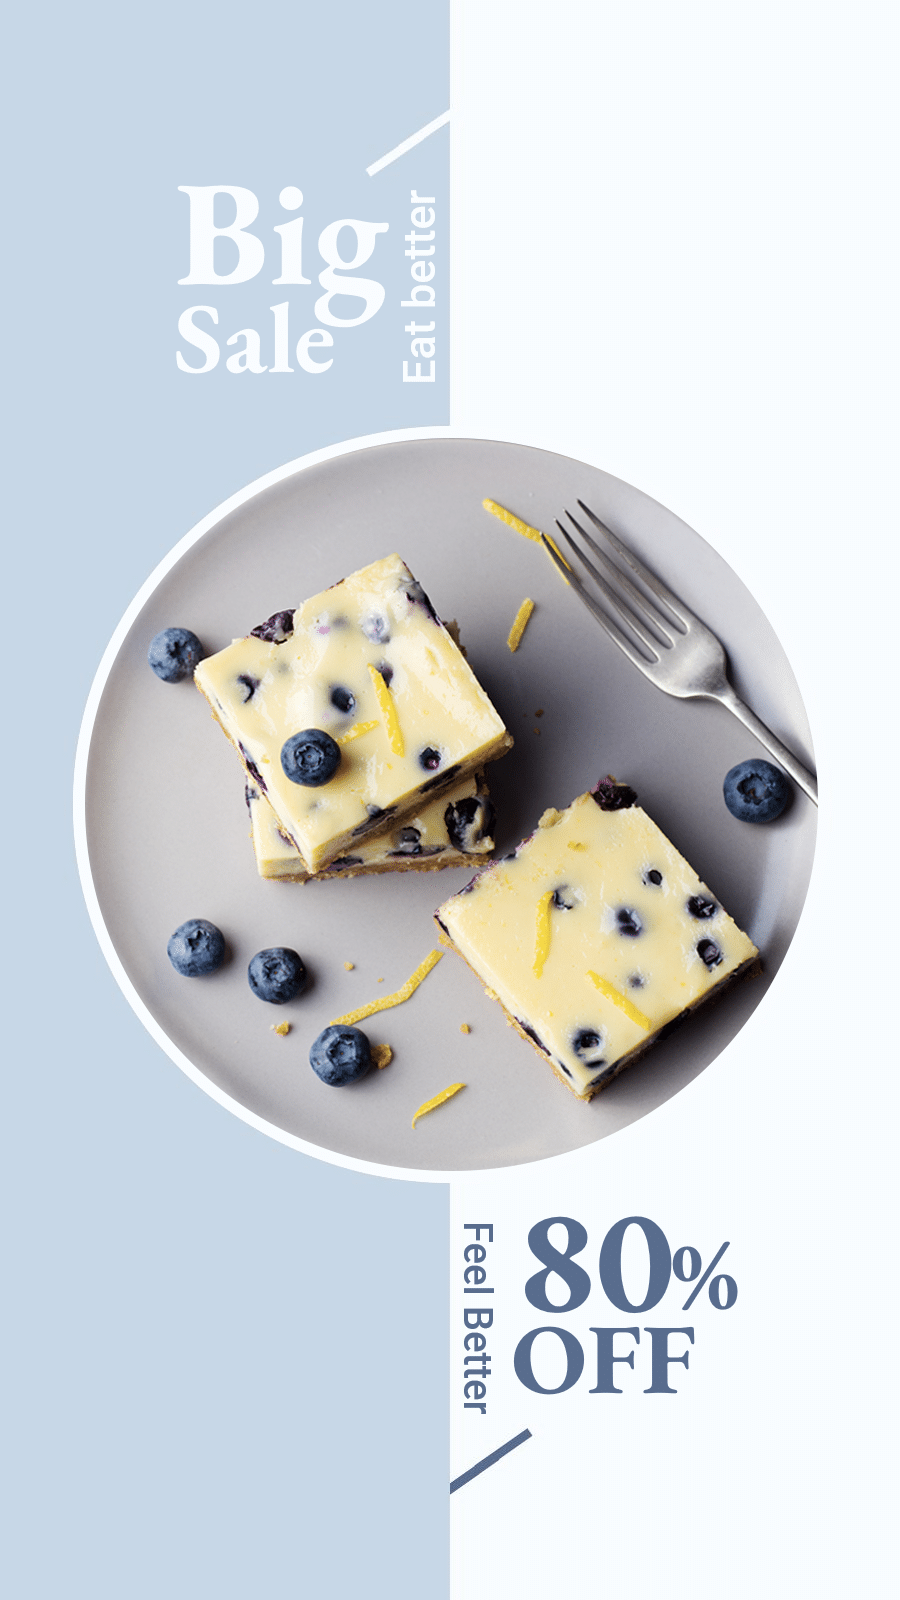 Blueberry Cheese Crackers Discount Sale Ecommerce Story预览效果